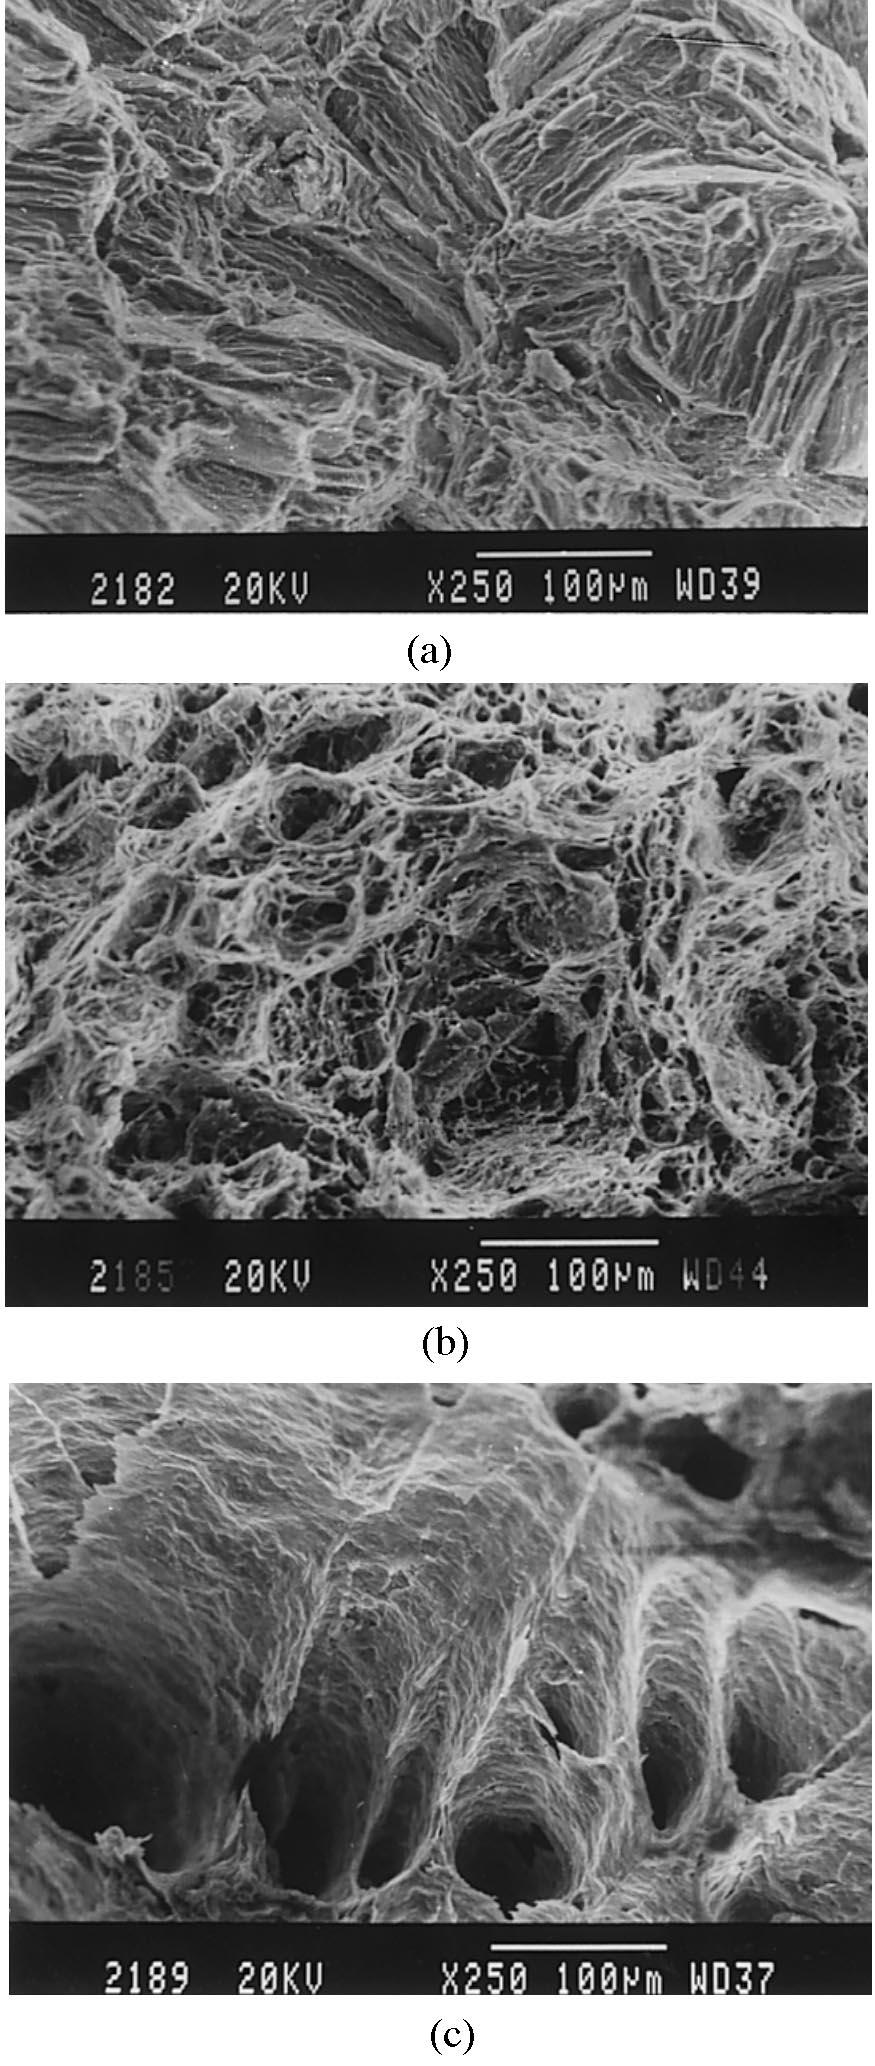 R.A. Sara anan, M.K. Surappa / Materials Science and Engineering A276 (2000) 108 116 113 Fig. 7. SEM fractographs of unreinforced Mg tested at (a) room temperature; (b) 250 C; and (c) 350 C 4.